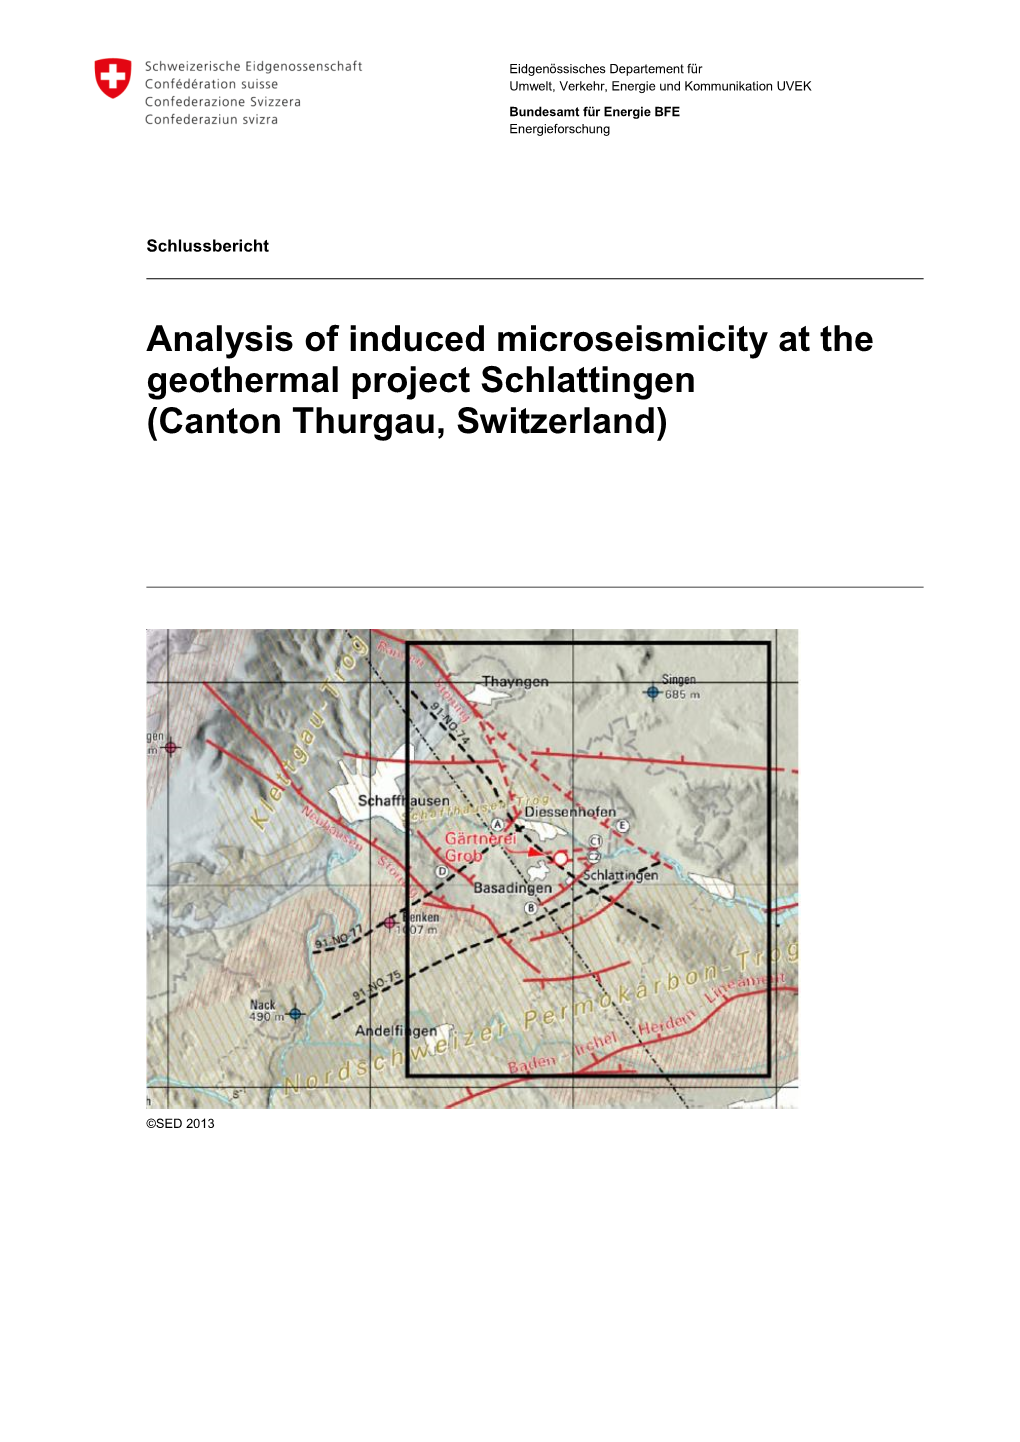 Analysis of Induced Microseismicity at the Geothermal Project Schlattingen (Canton Thurgau, Switzerland)